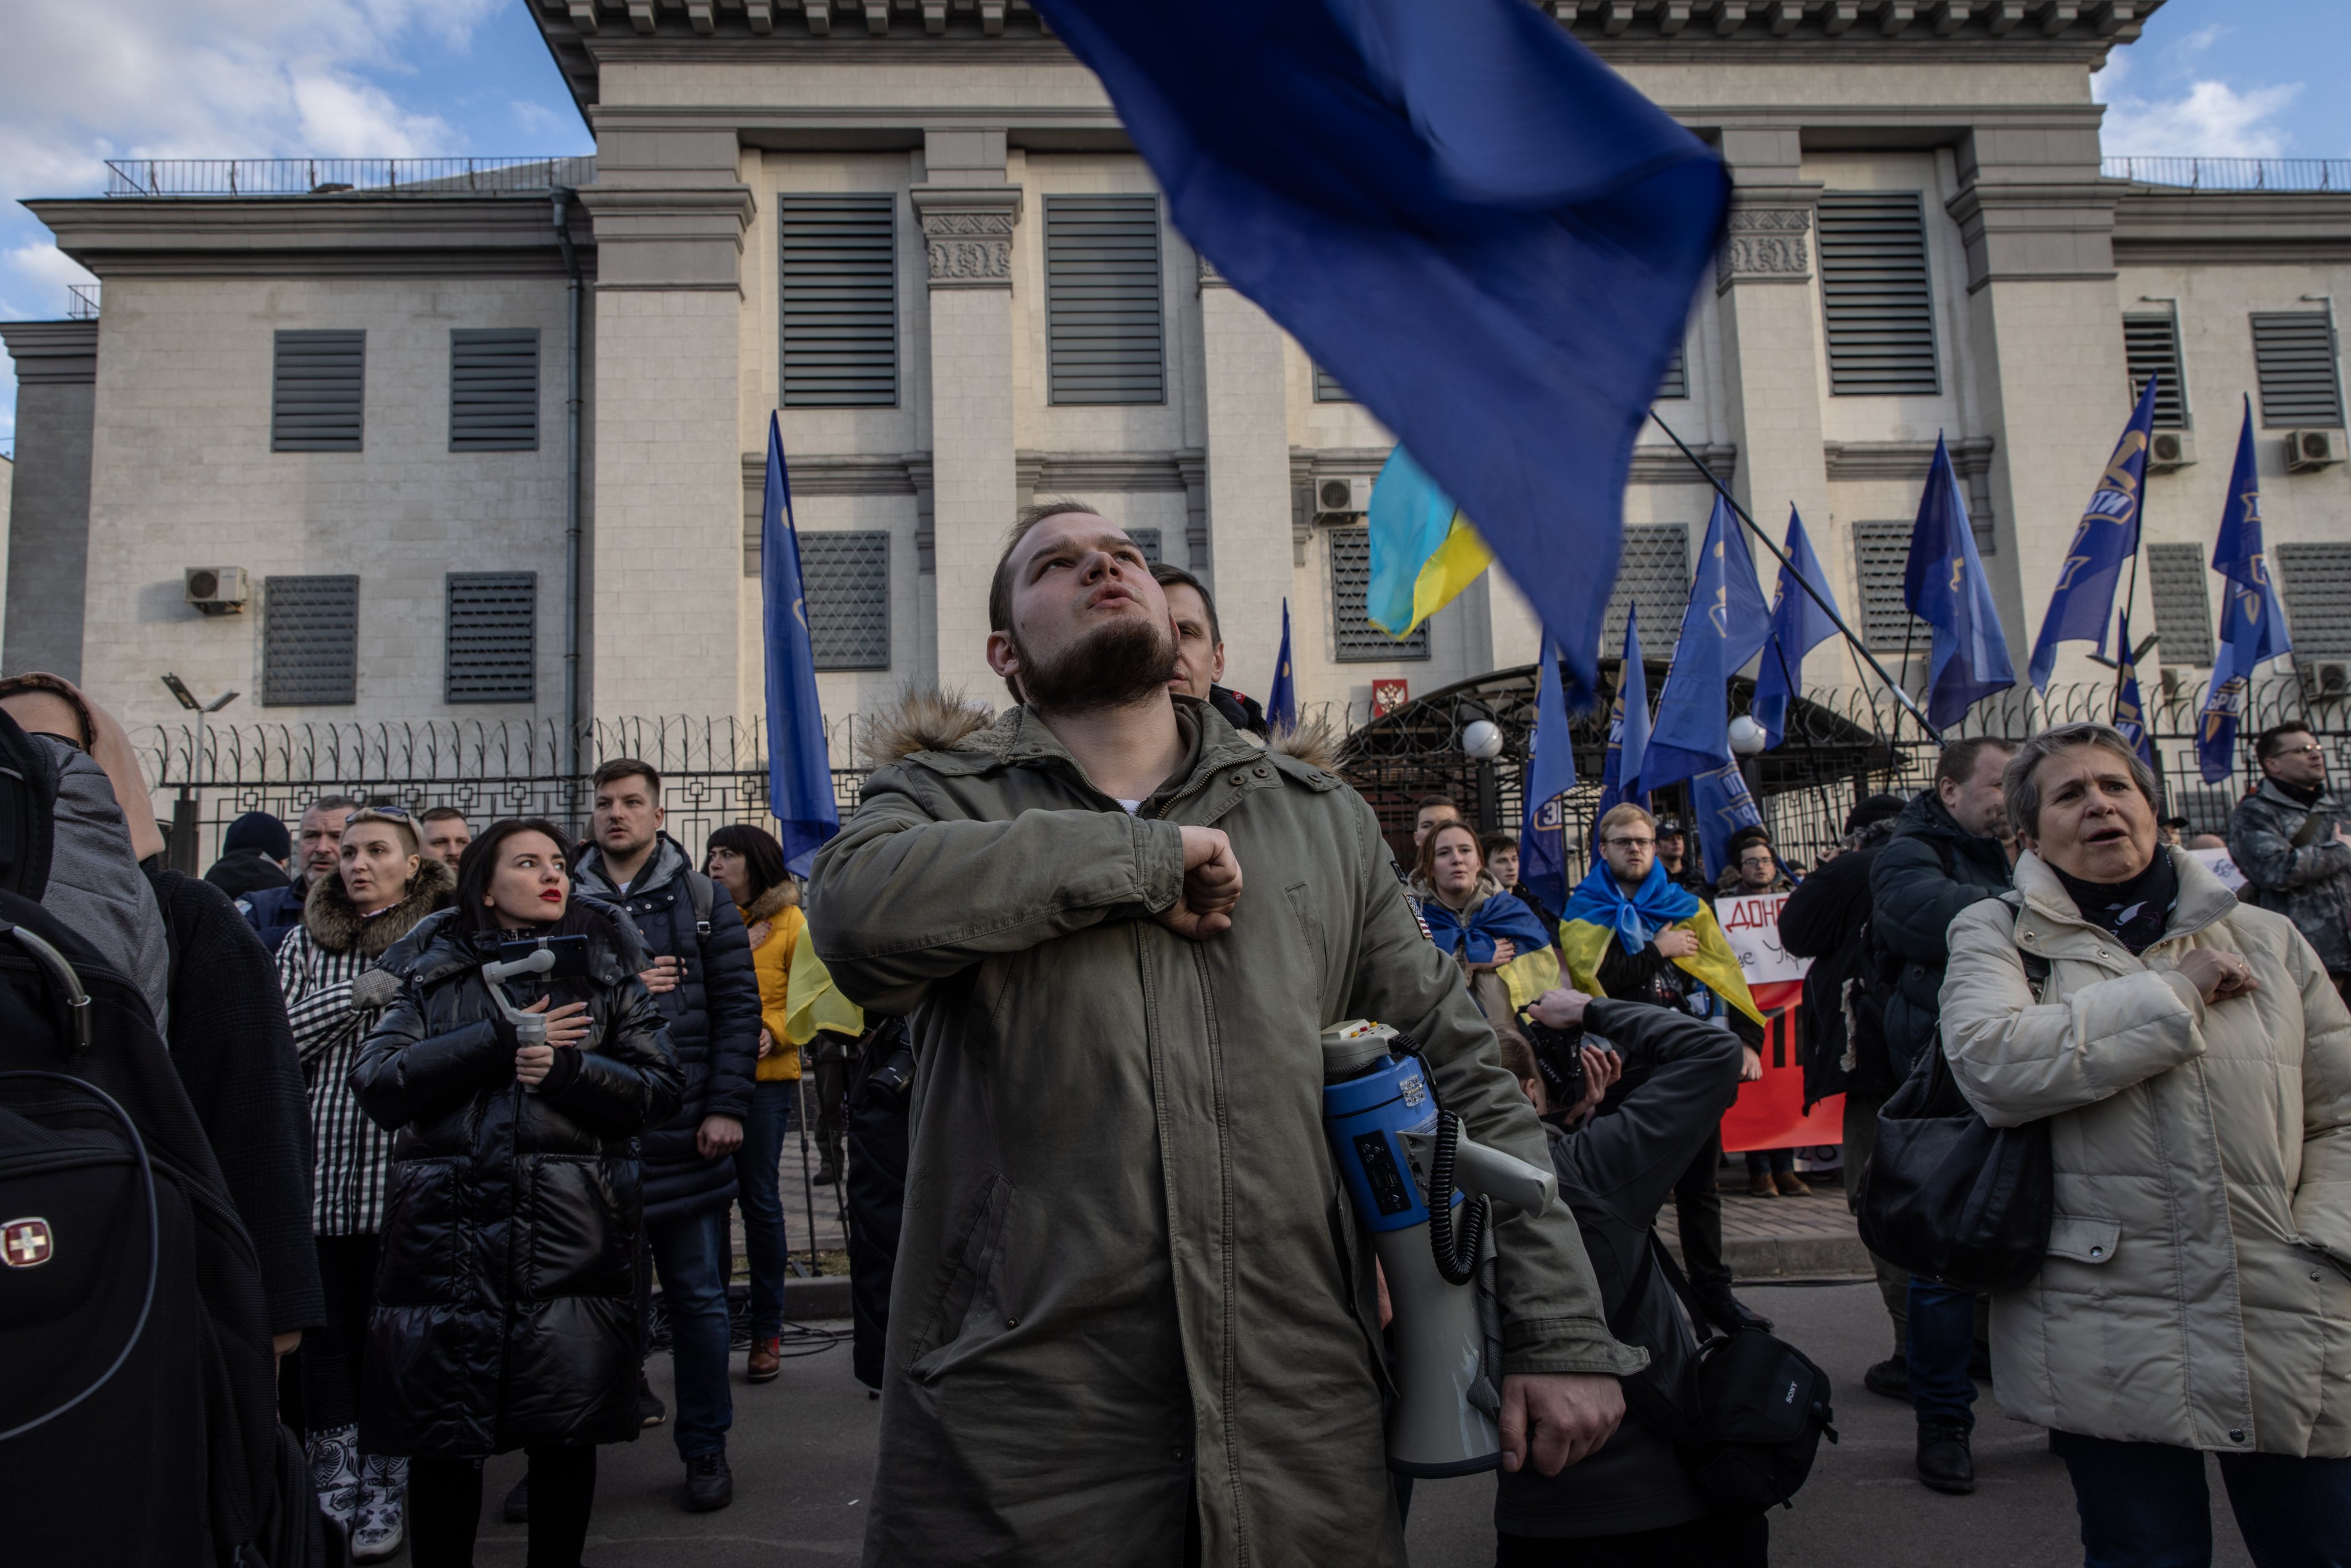 Kyiv Reacts To Looming Threat Of Invasion